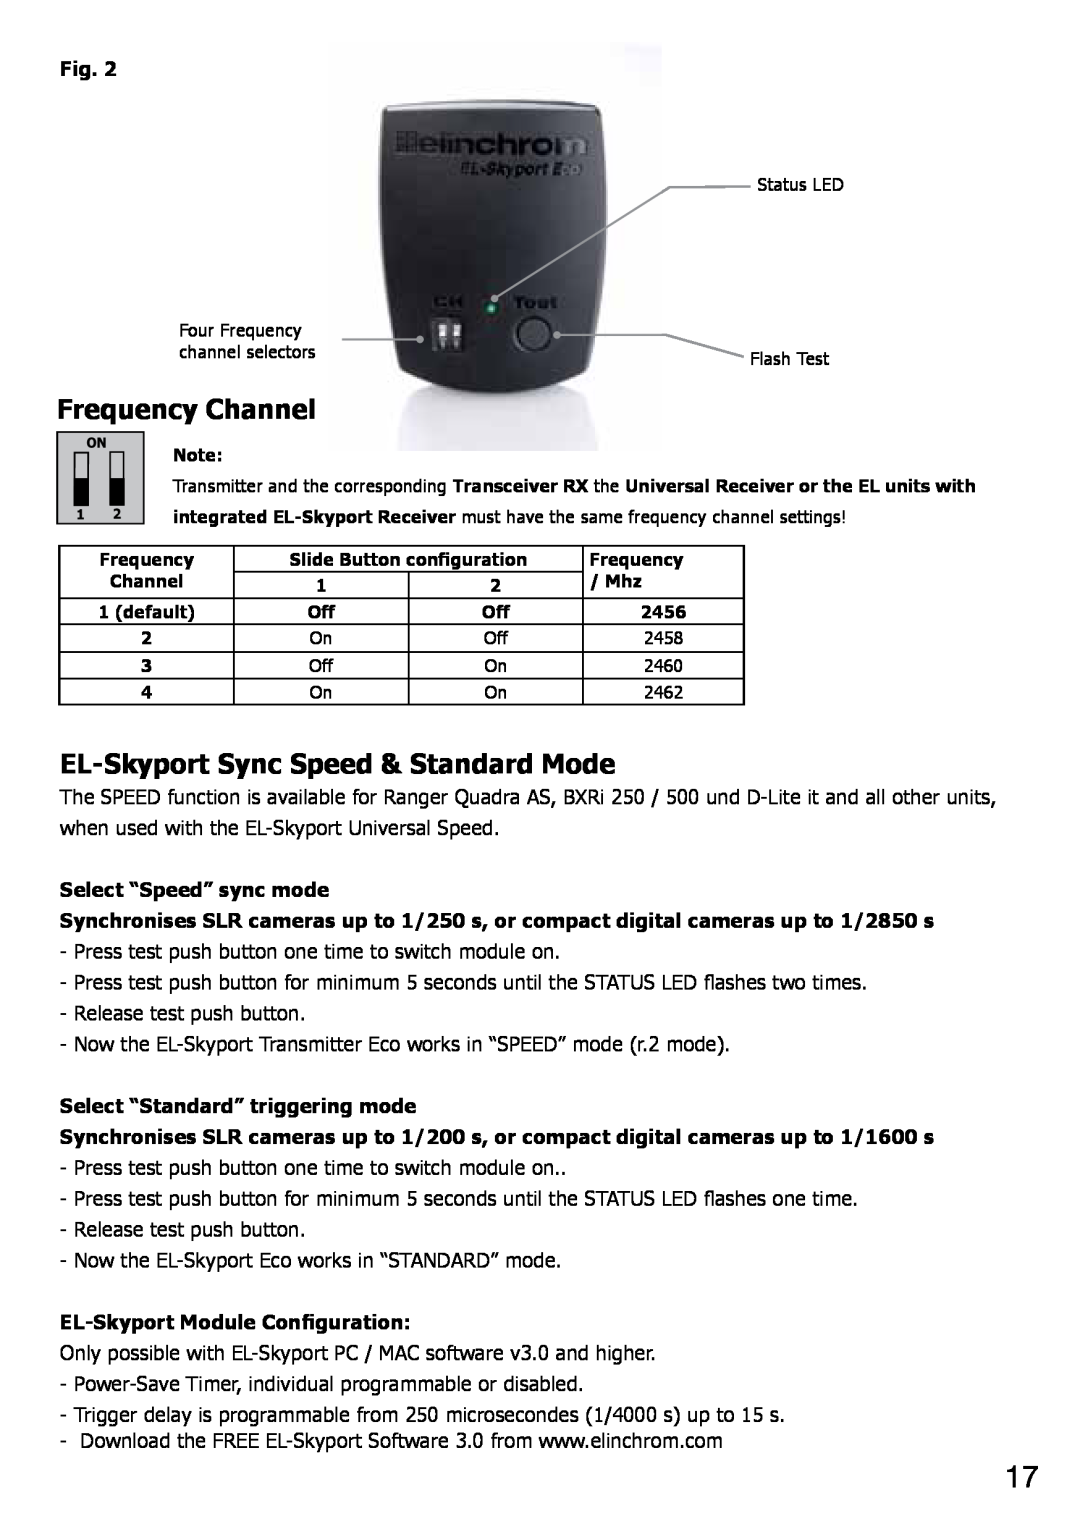 Elinchrom 2 IT, 4 IT operation manual Frequency Channel, EL-SkyportSync Speed & Standard Mode, Select “Speed” sync mode 